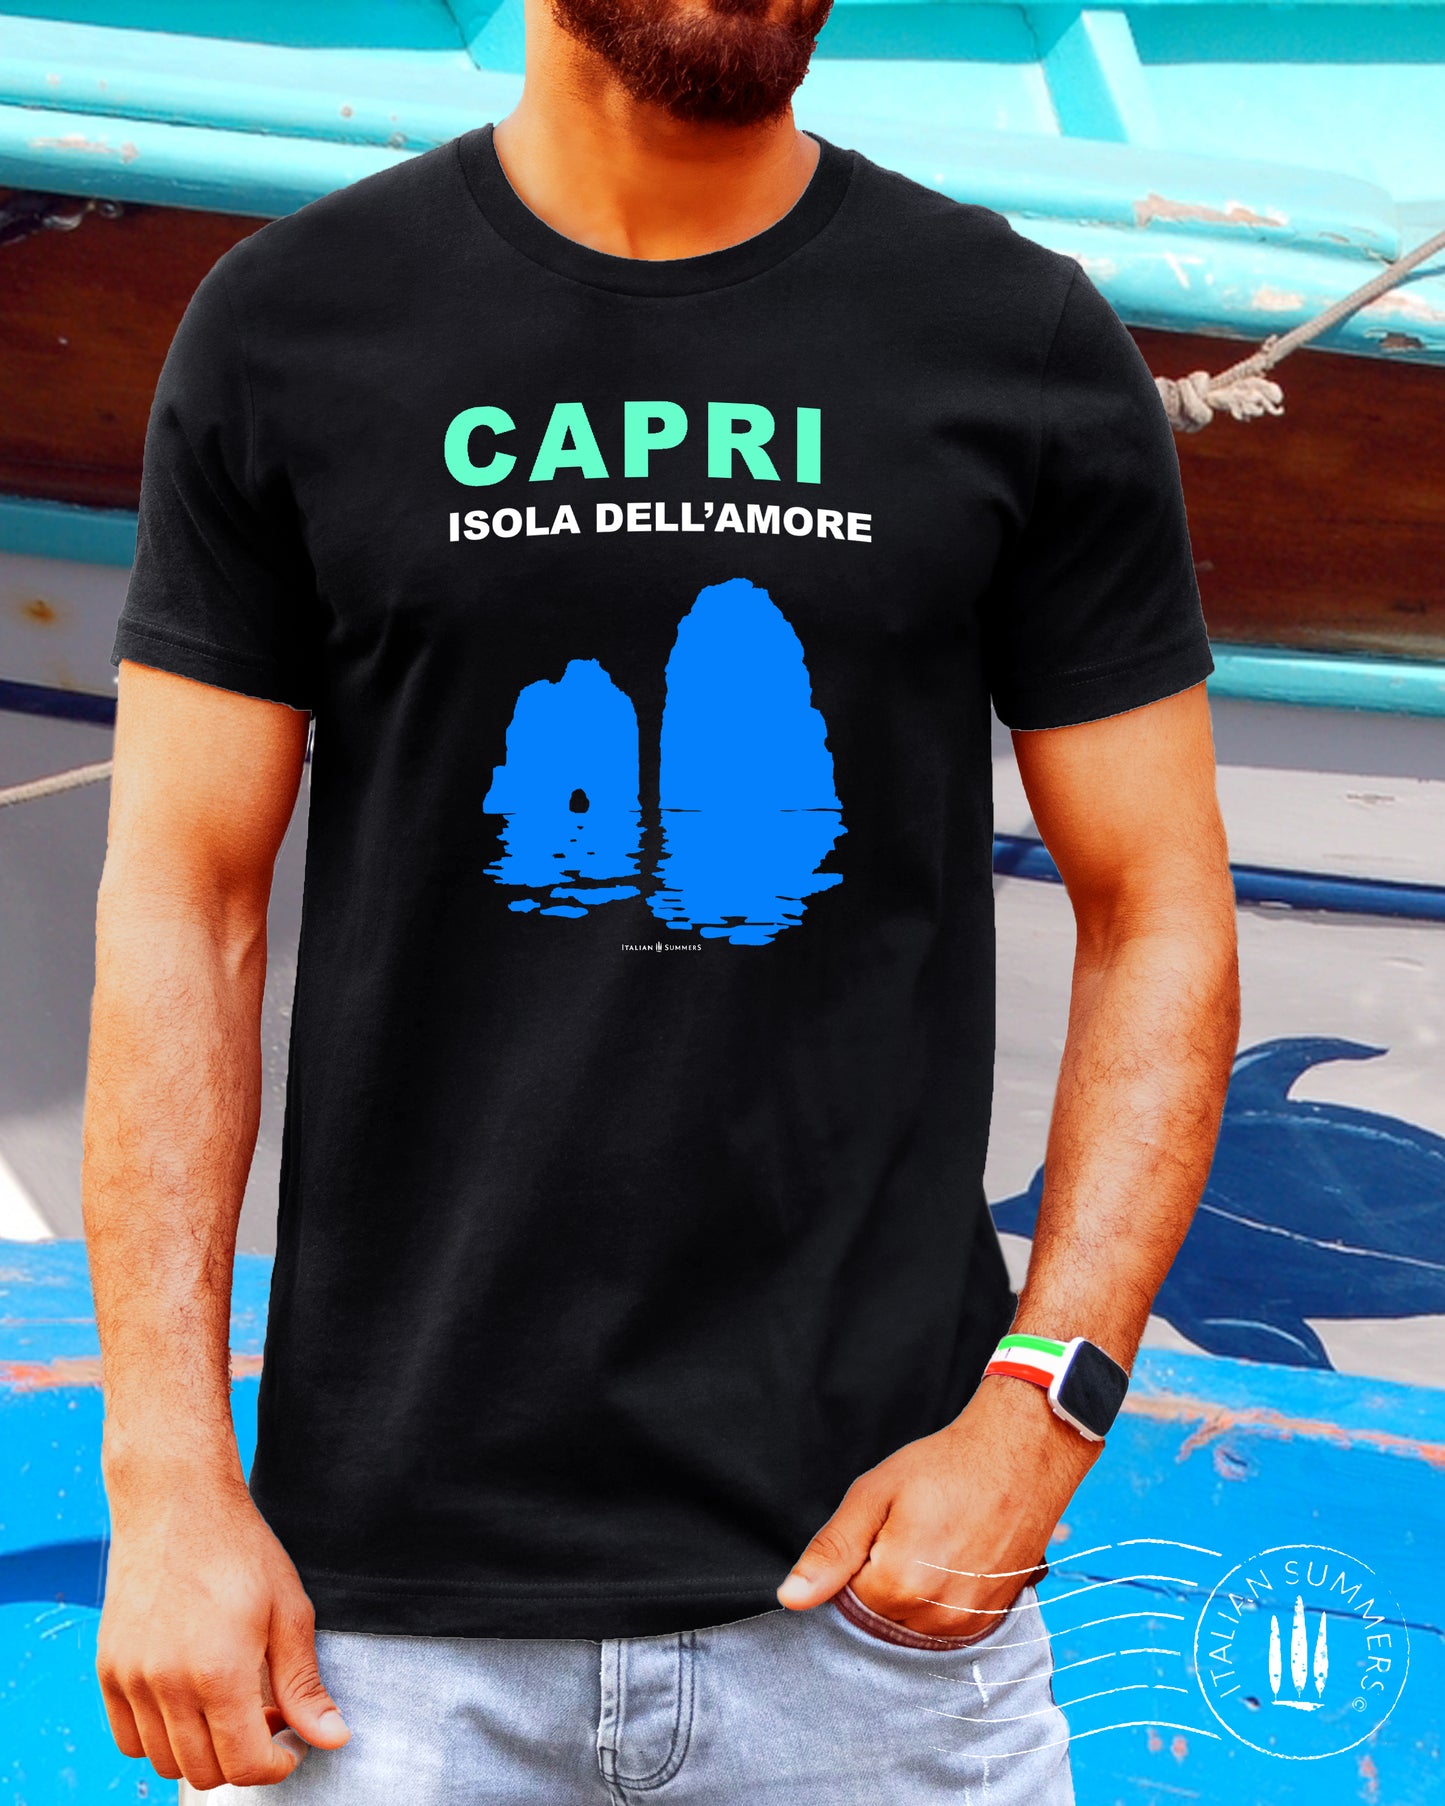 Italy inspired garment dyed T shirt with the aqua and white text: CAPRI, Isola dell'Amore (Capri, Iland of Love) with the silhouette  of the famous Faraglioni and their reflection umpon the waters of the Mediterranean Sea. Made by Italian Summers